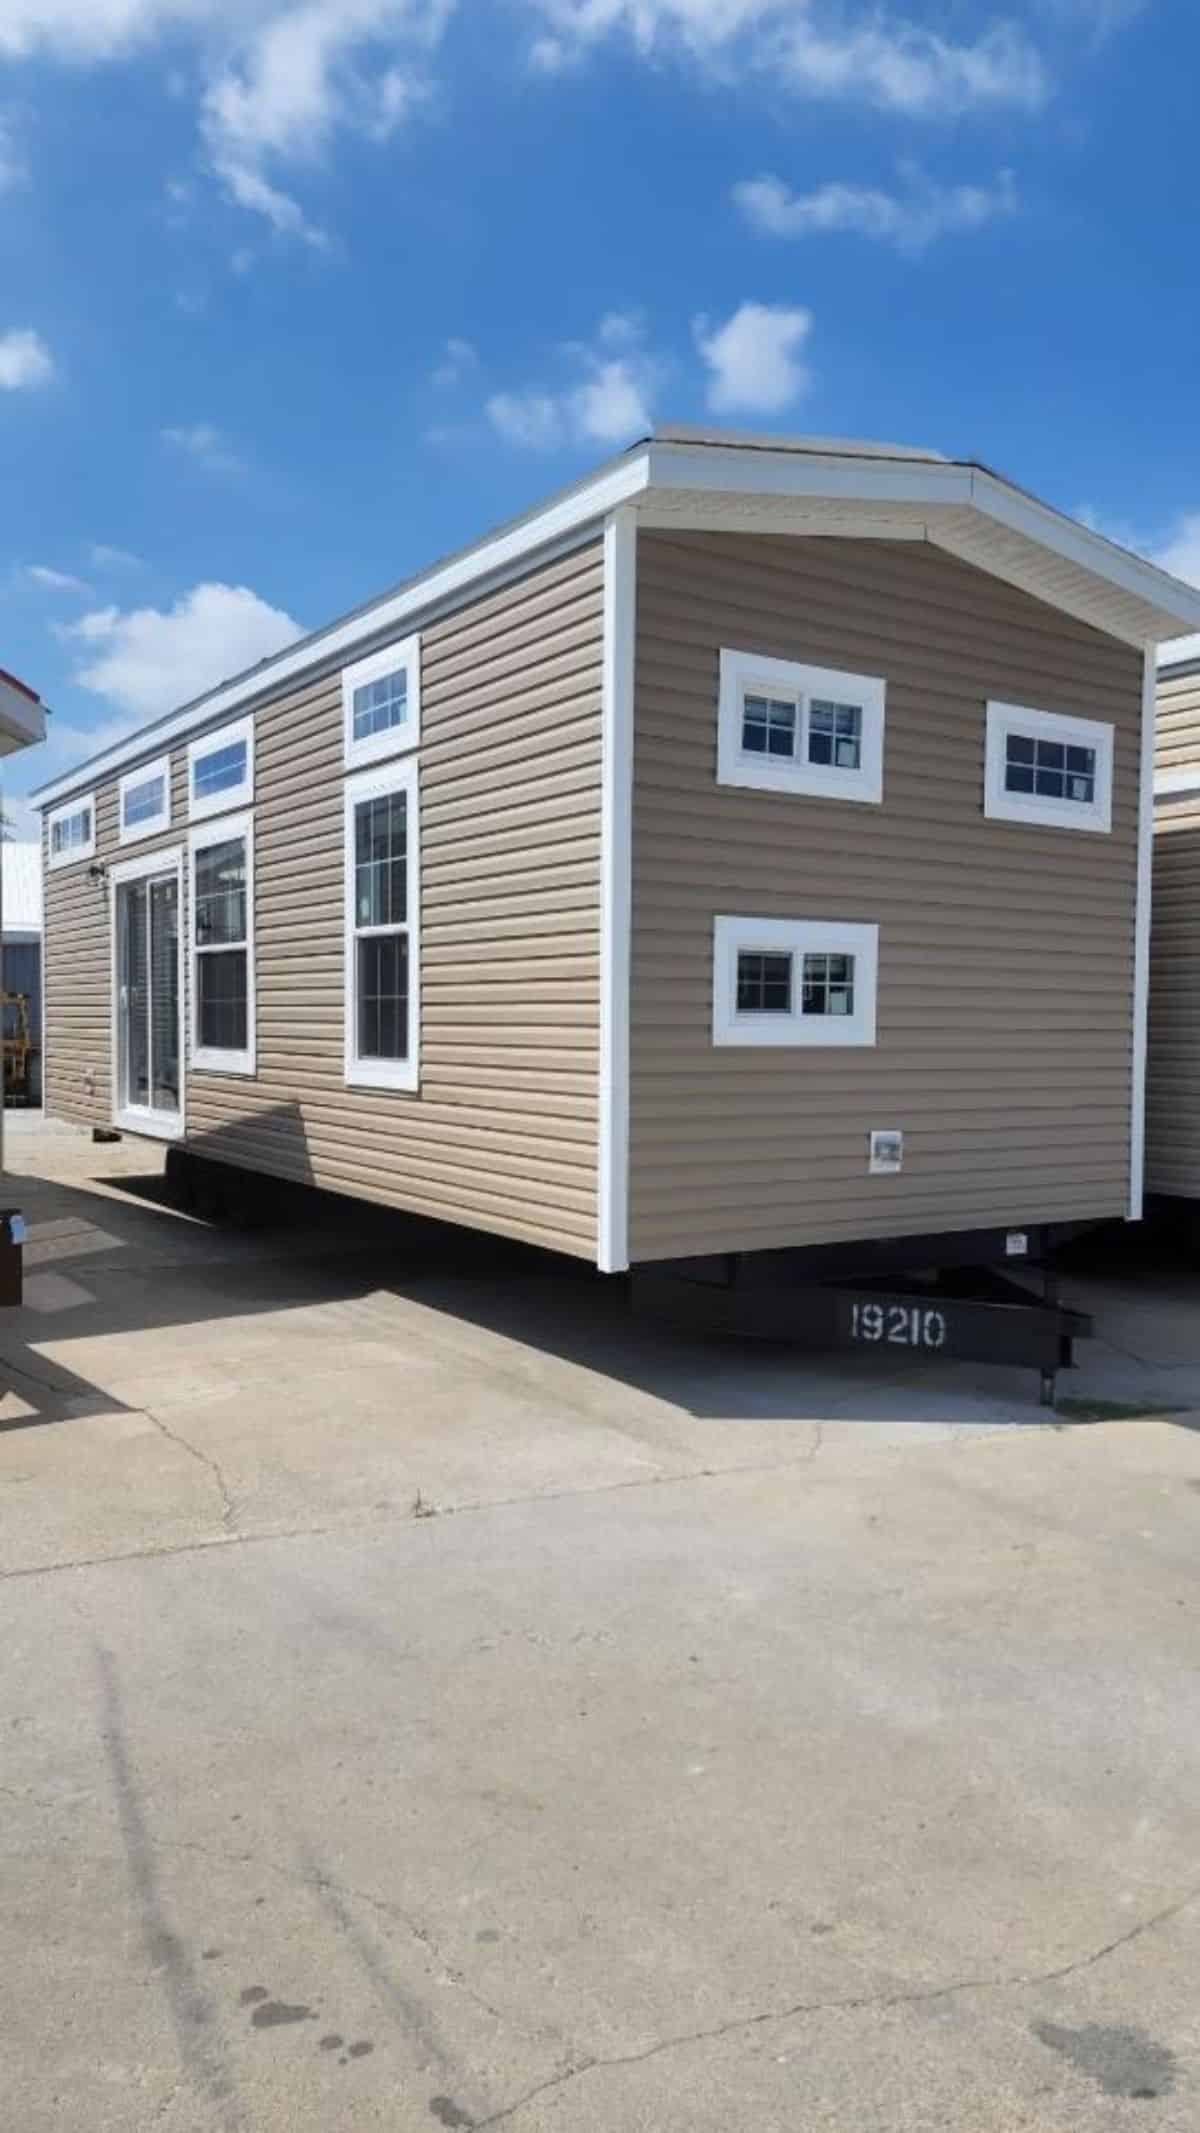 Stunning exterior and main entrance view of two bedroom tiny home